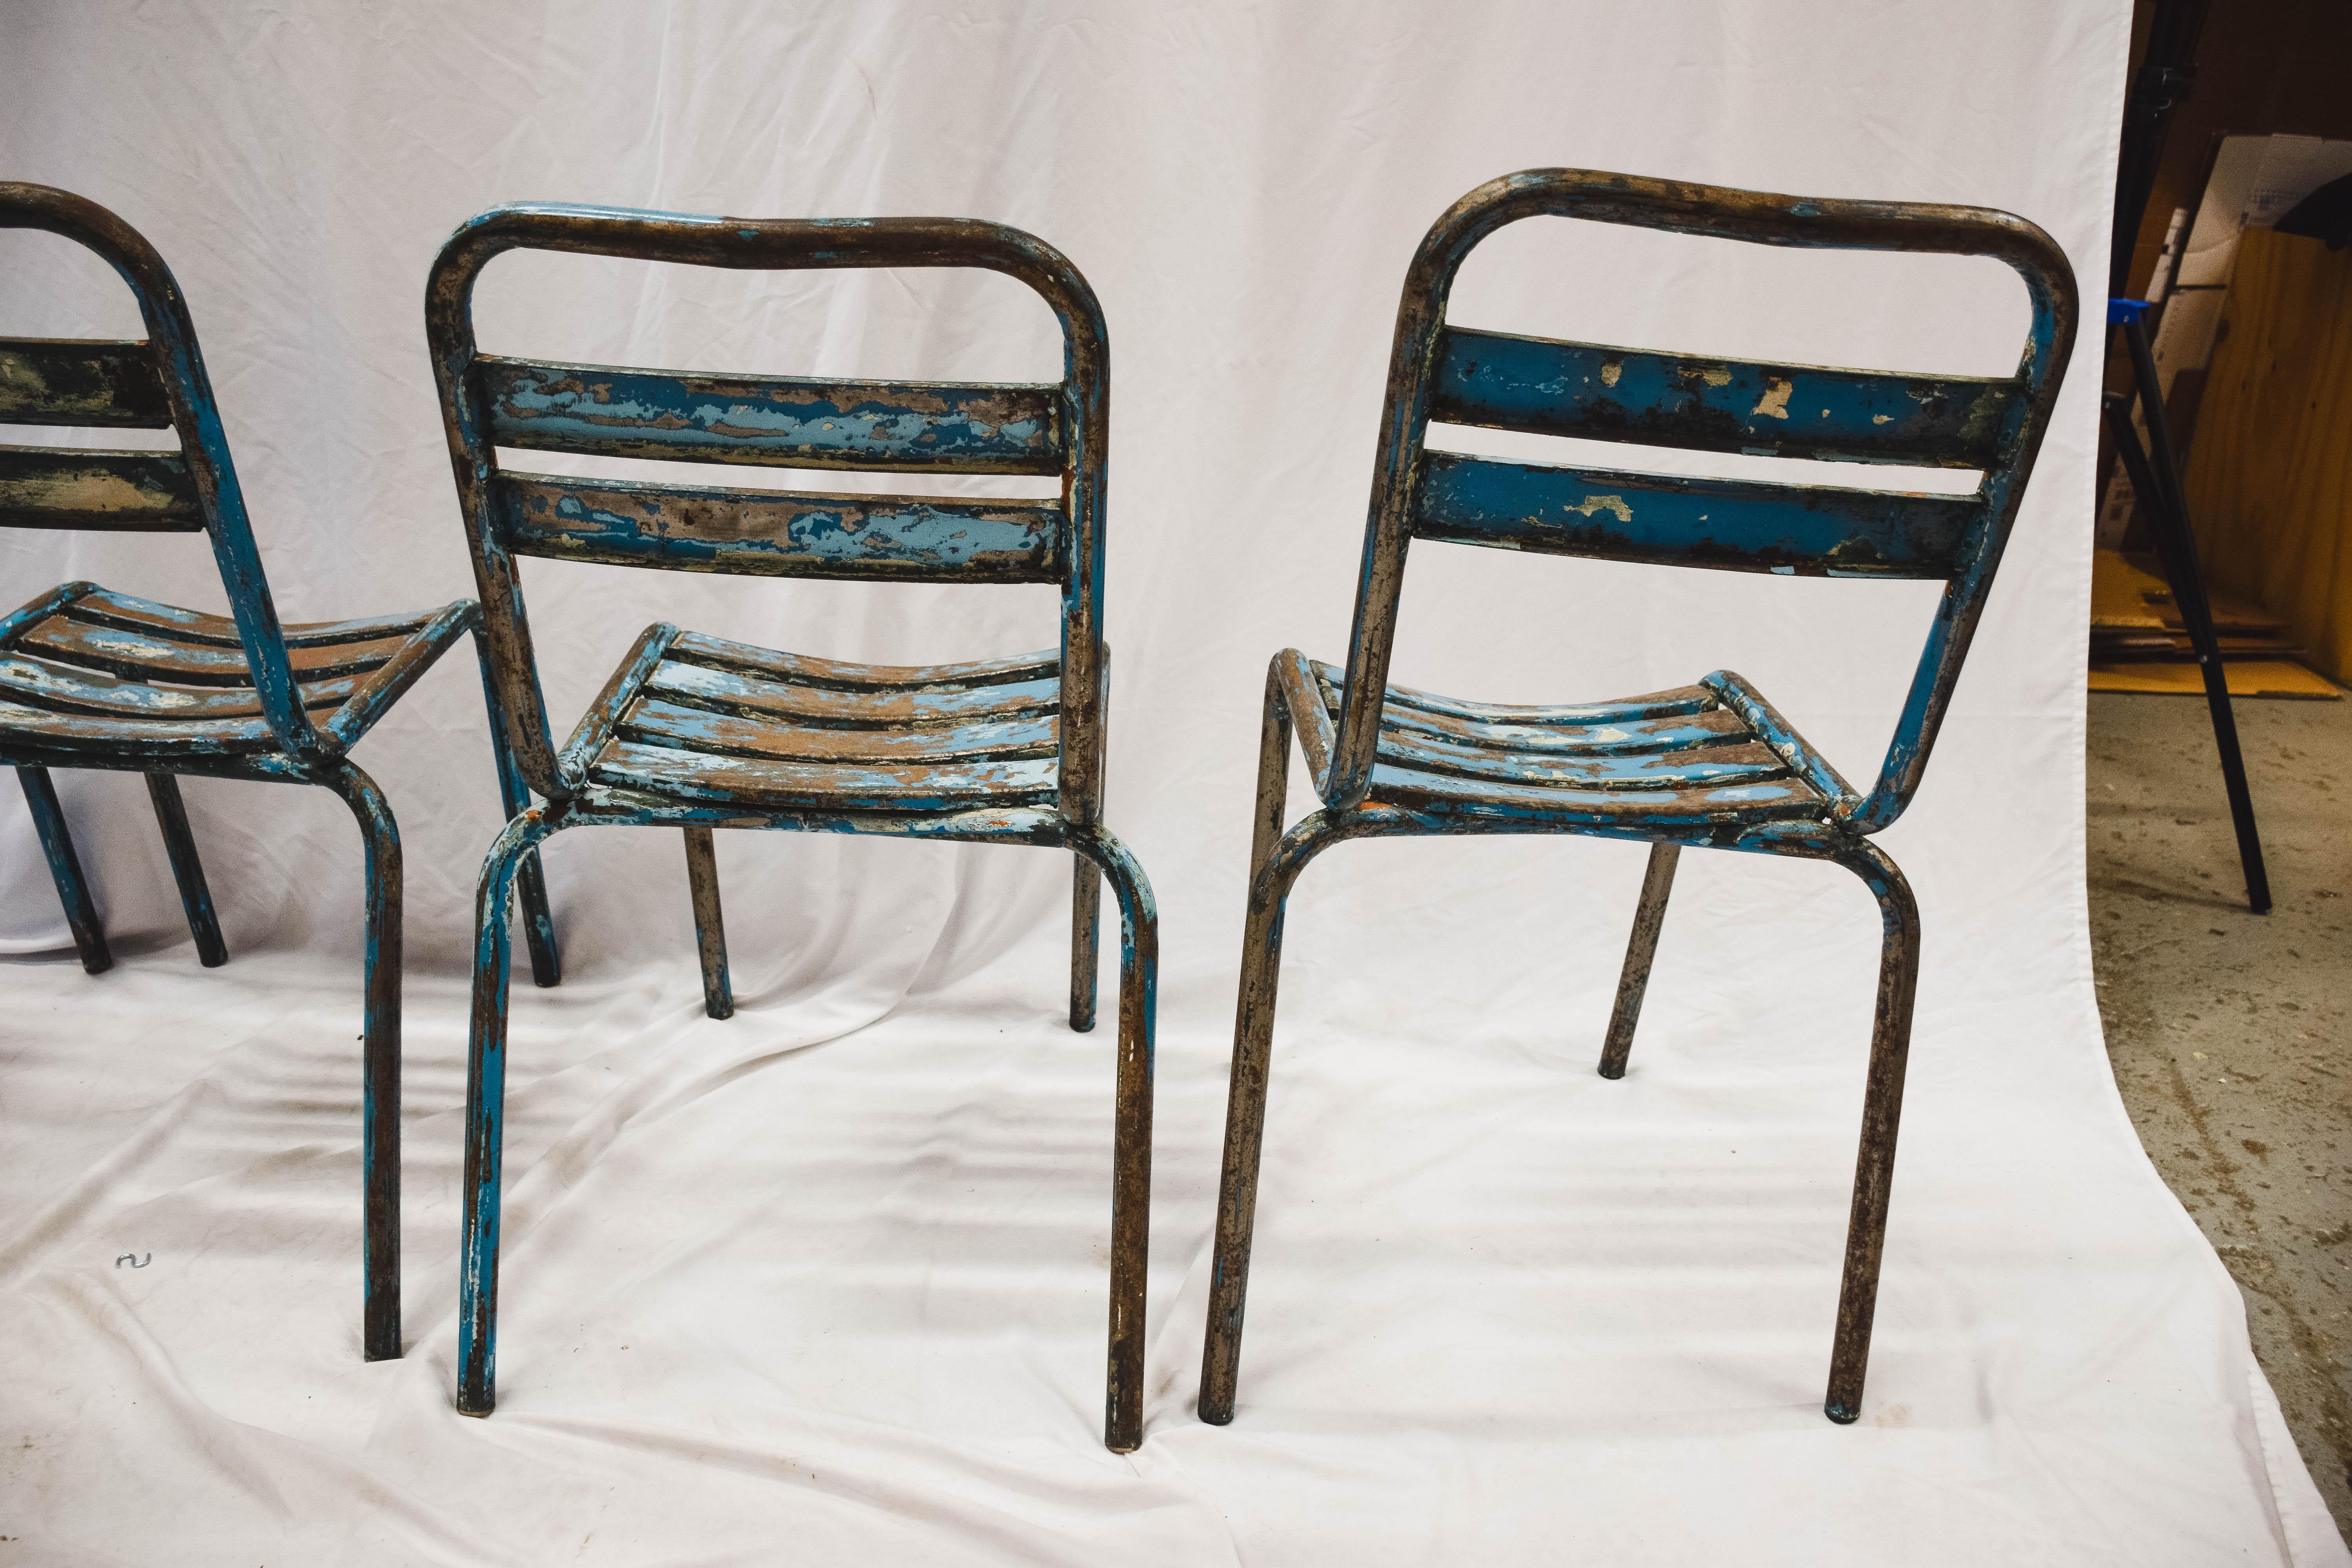 20th Century Set of 4 Vintage Metal Cafe Dining Chairs